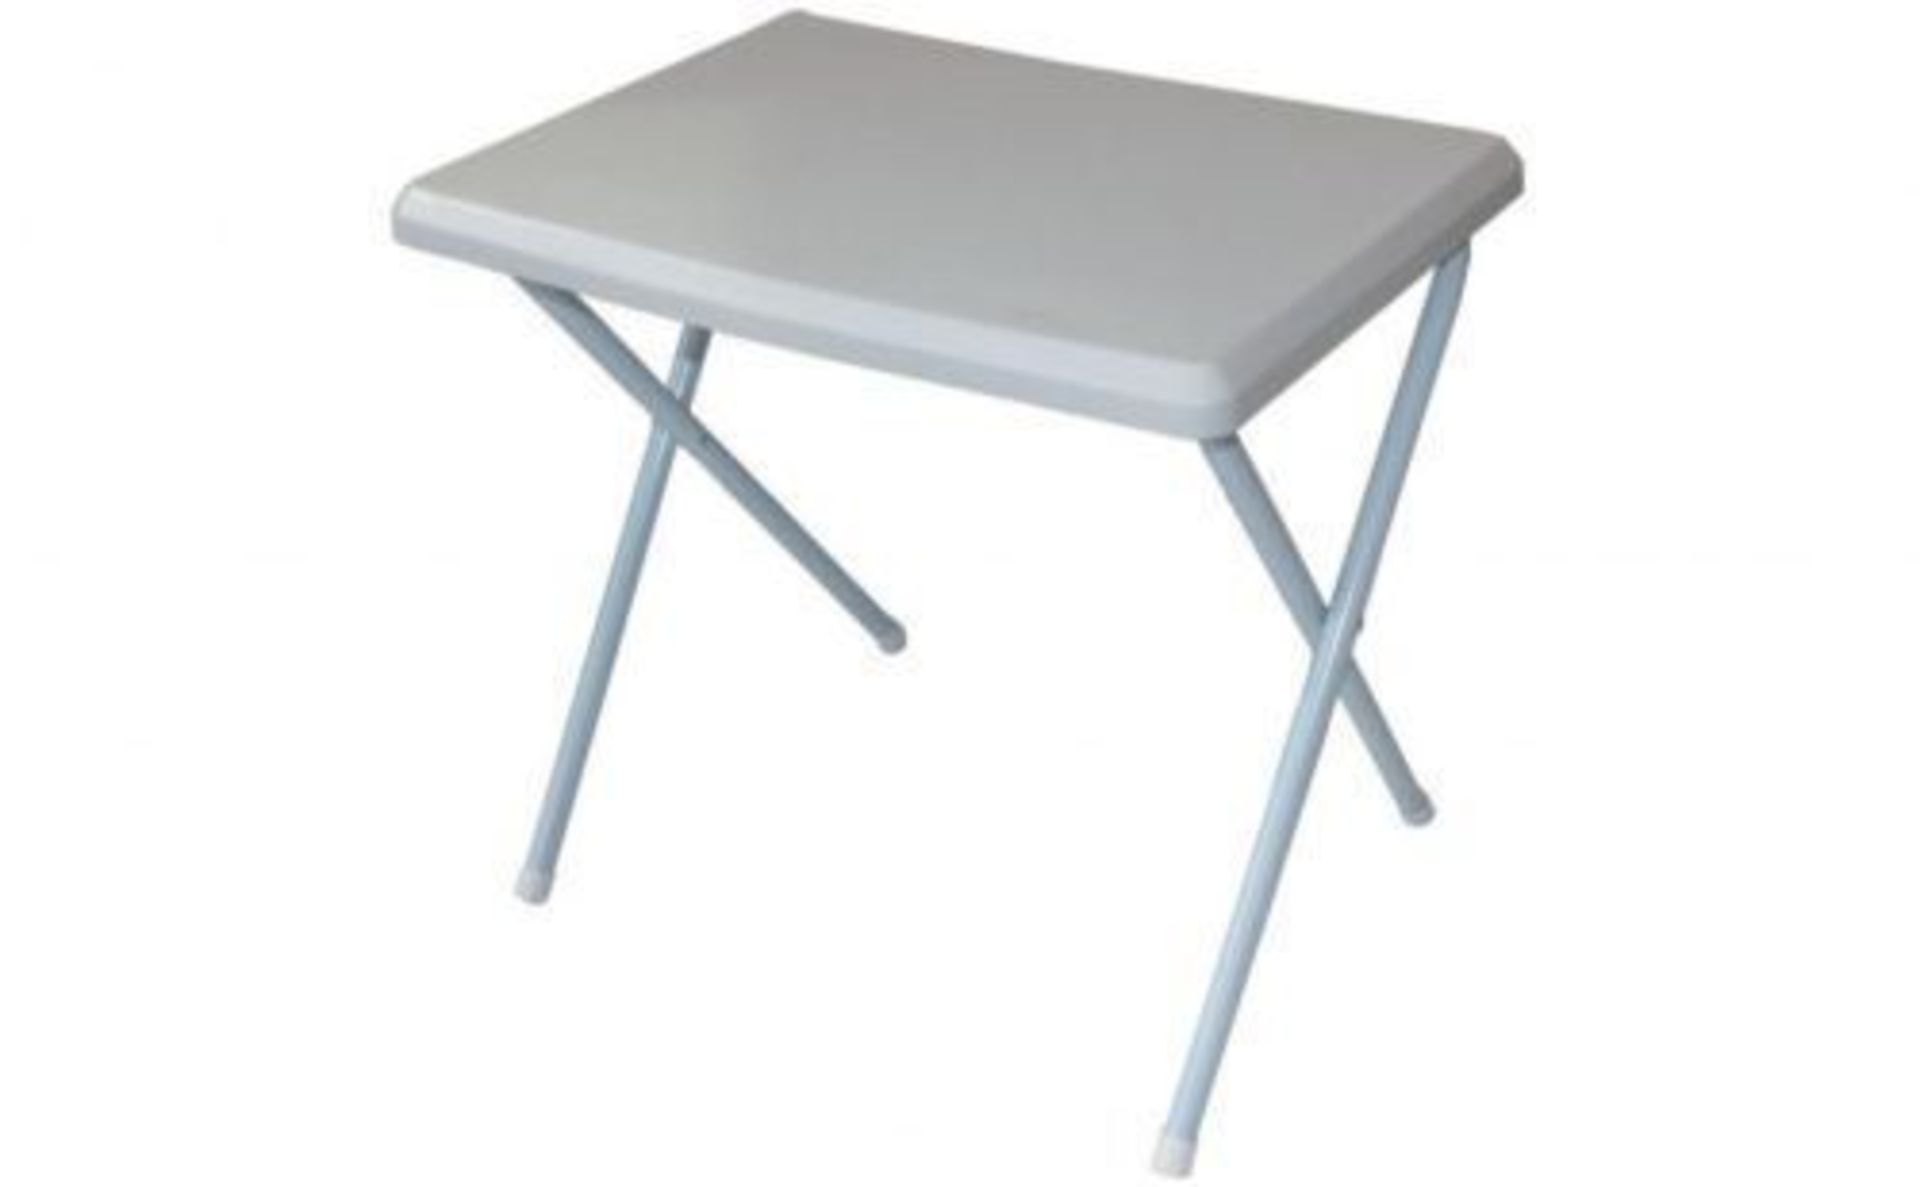 V Brand New Low Profile Folding Table